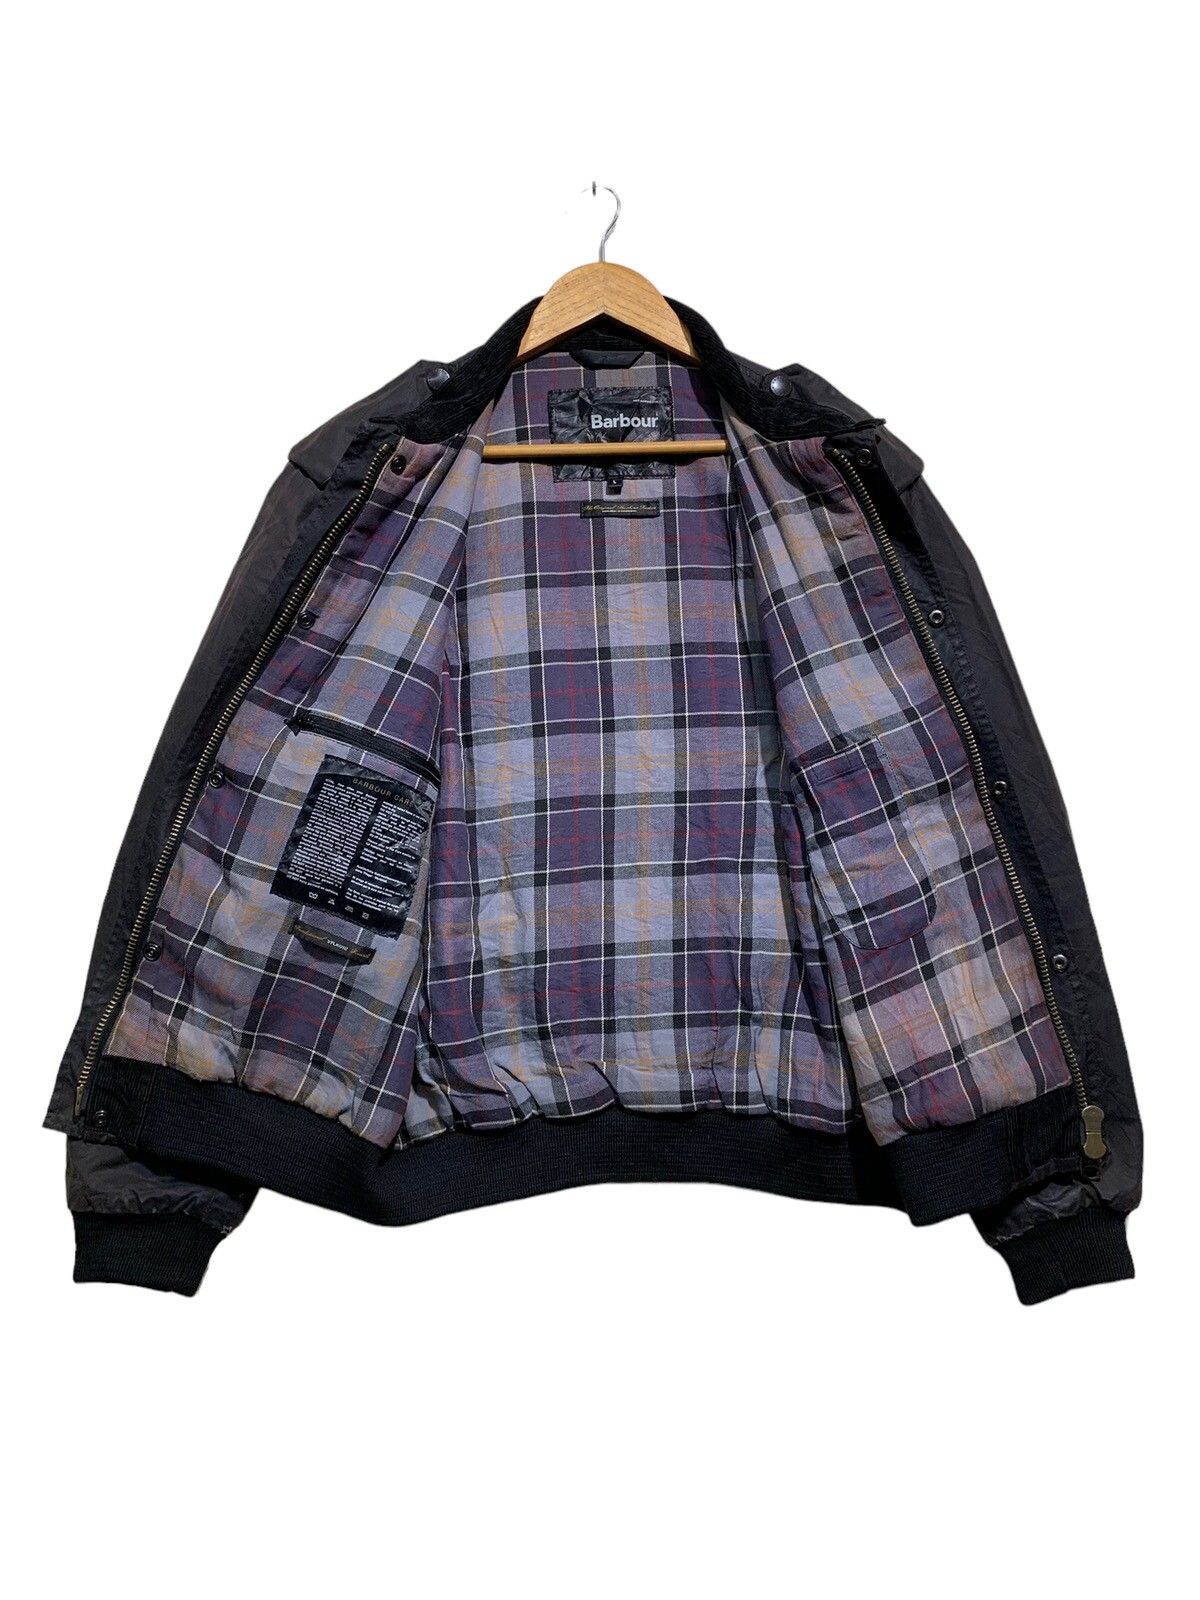 🔥BARBOUR INTERNATIONAL WAXED BOMBER JACKETS - 12